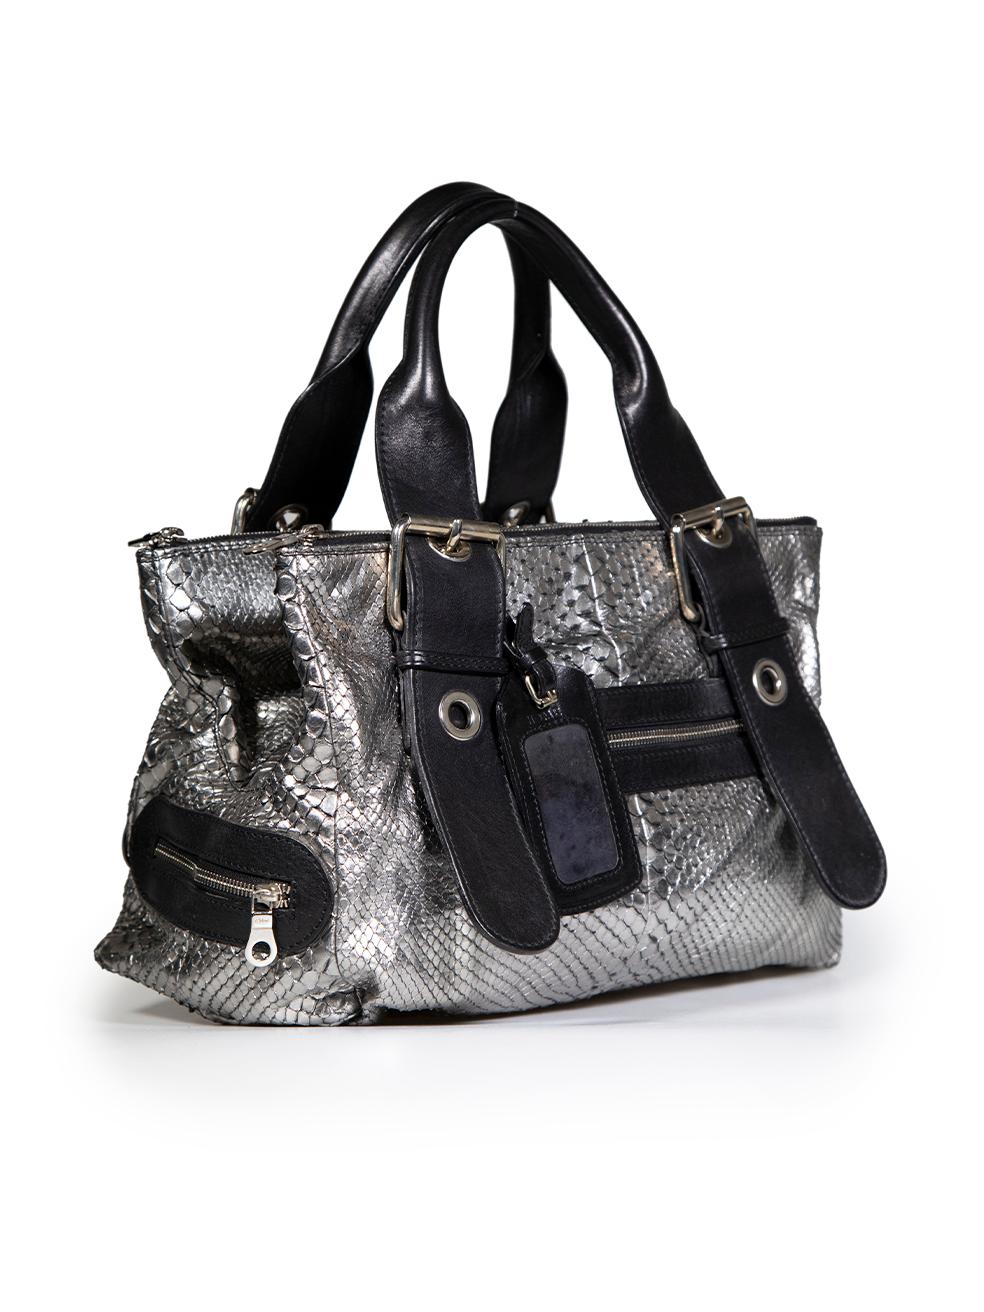 CONDITION is Good. Minor wear to bag is evident. Light wear to the exterior with some very mild tarnishing of the hardware details, curling of the snakeskin and creasing of the leather seen throughout. Spots of discolouration are also found through